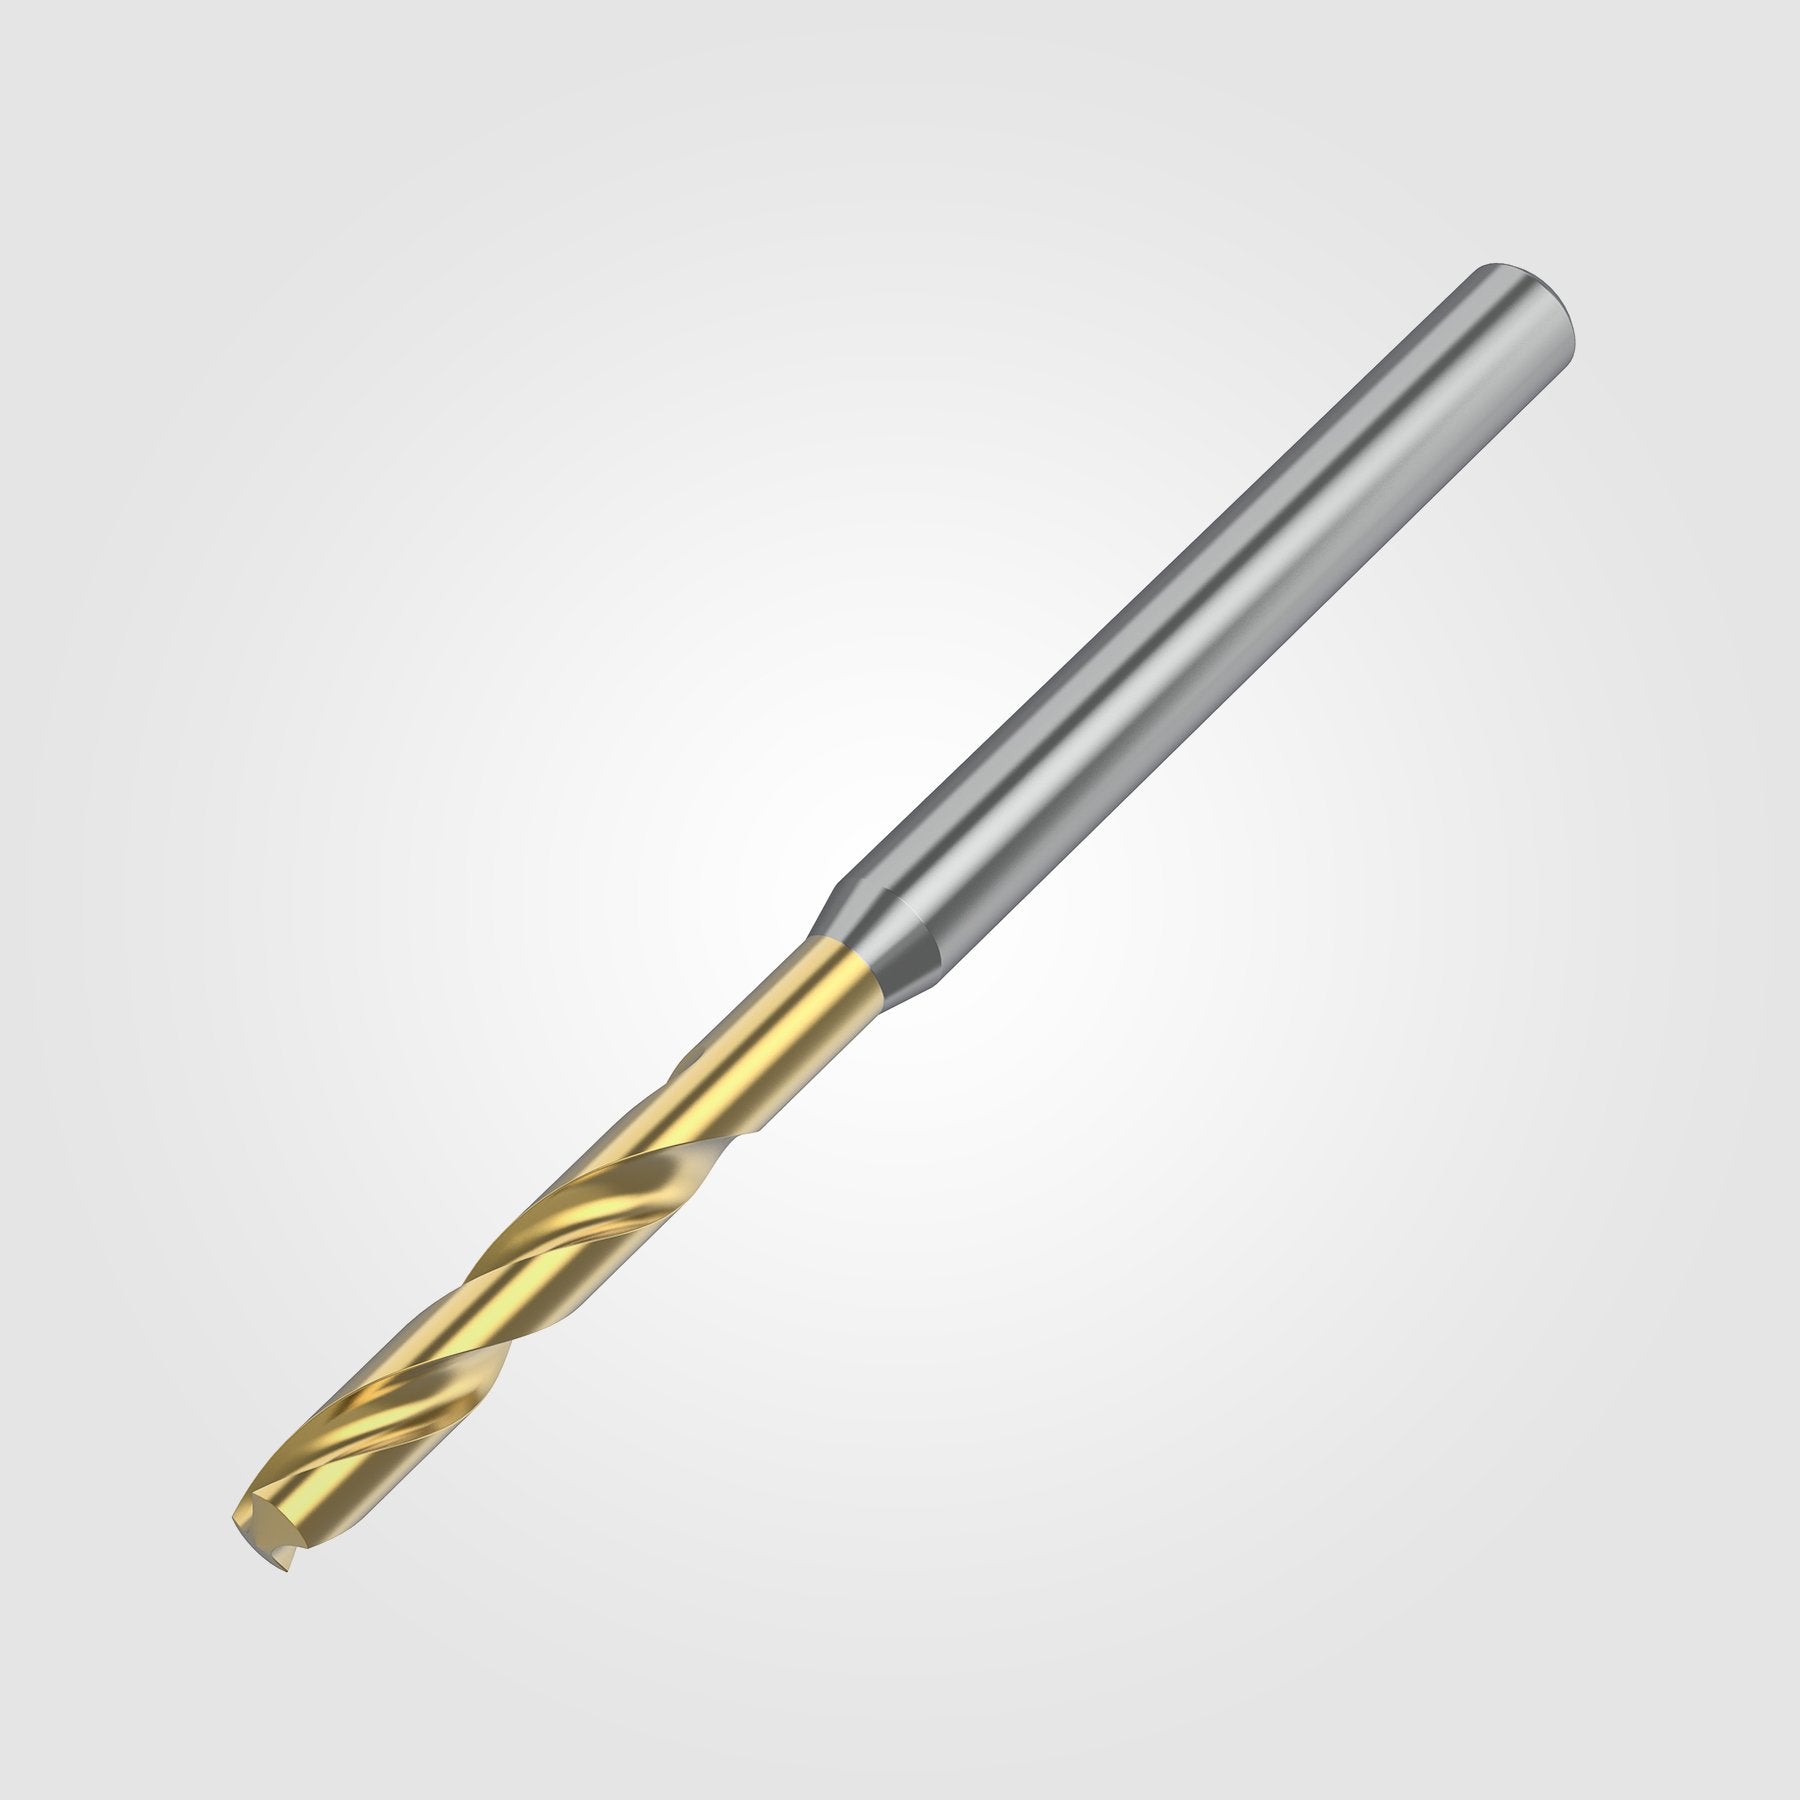 GOdrill (THROUGH COOLANT) | 5.616mm / .2211" / 5xD | SOLID CARBIDE DRILL | 4149221